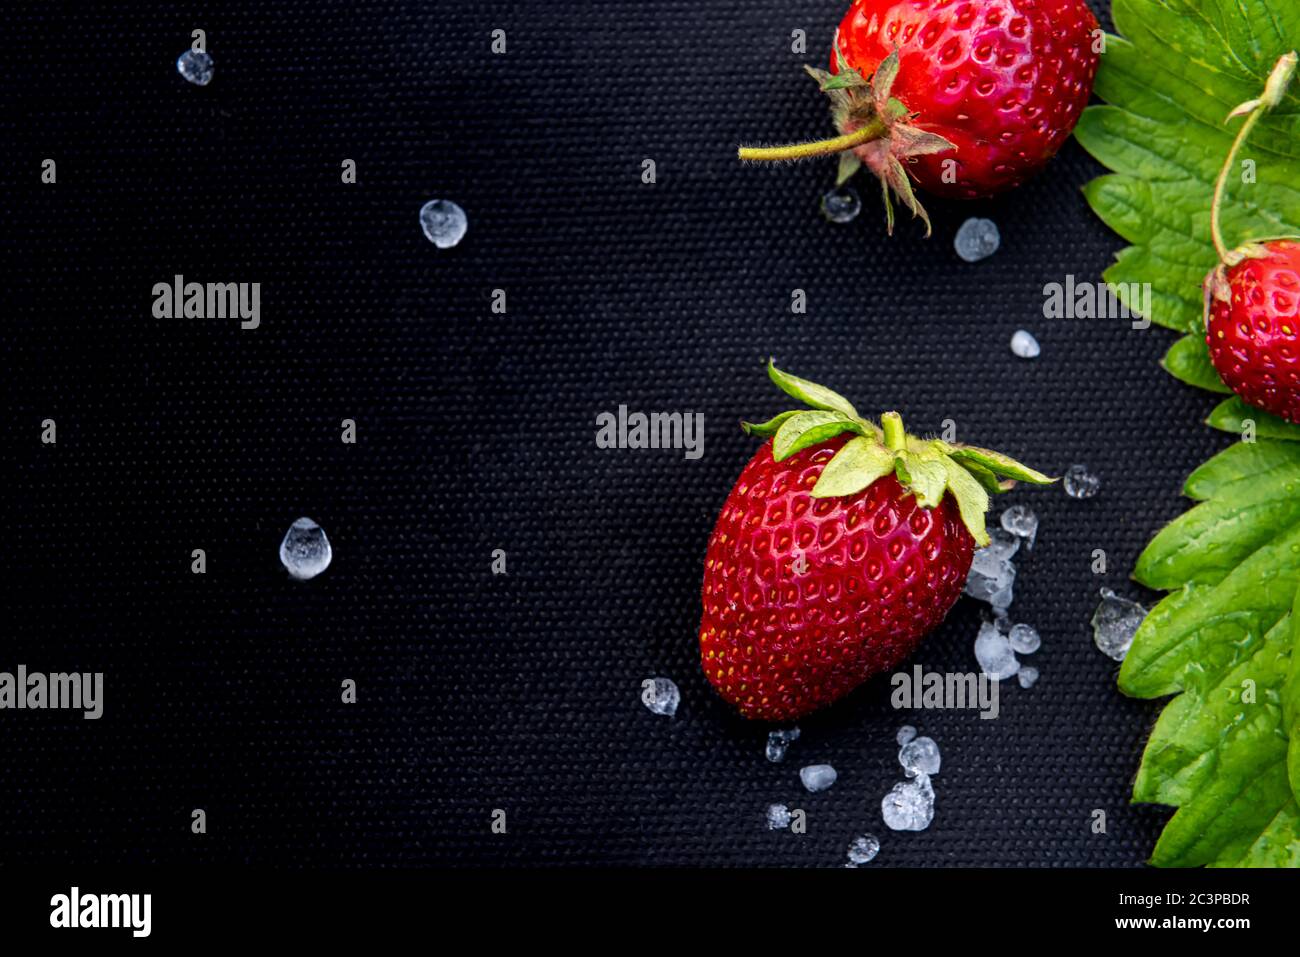 Beautiful red strawberries with few white hailstones and leaf on black textile material used for cultivating this berry in garden. Horizontal backgrou Stock Photo